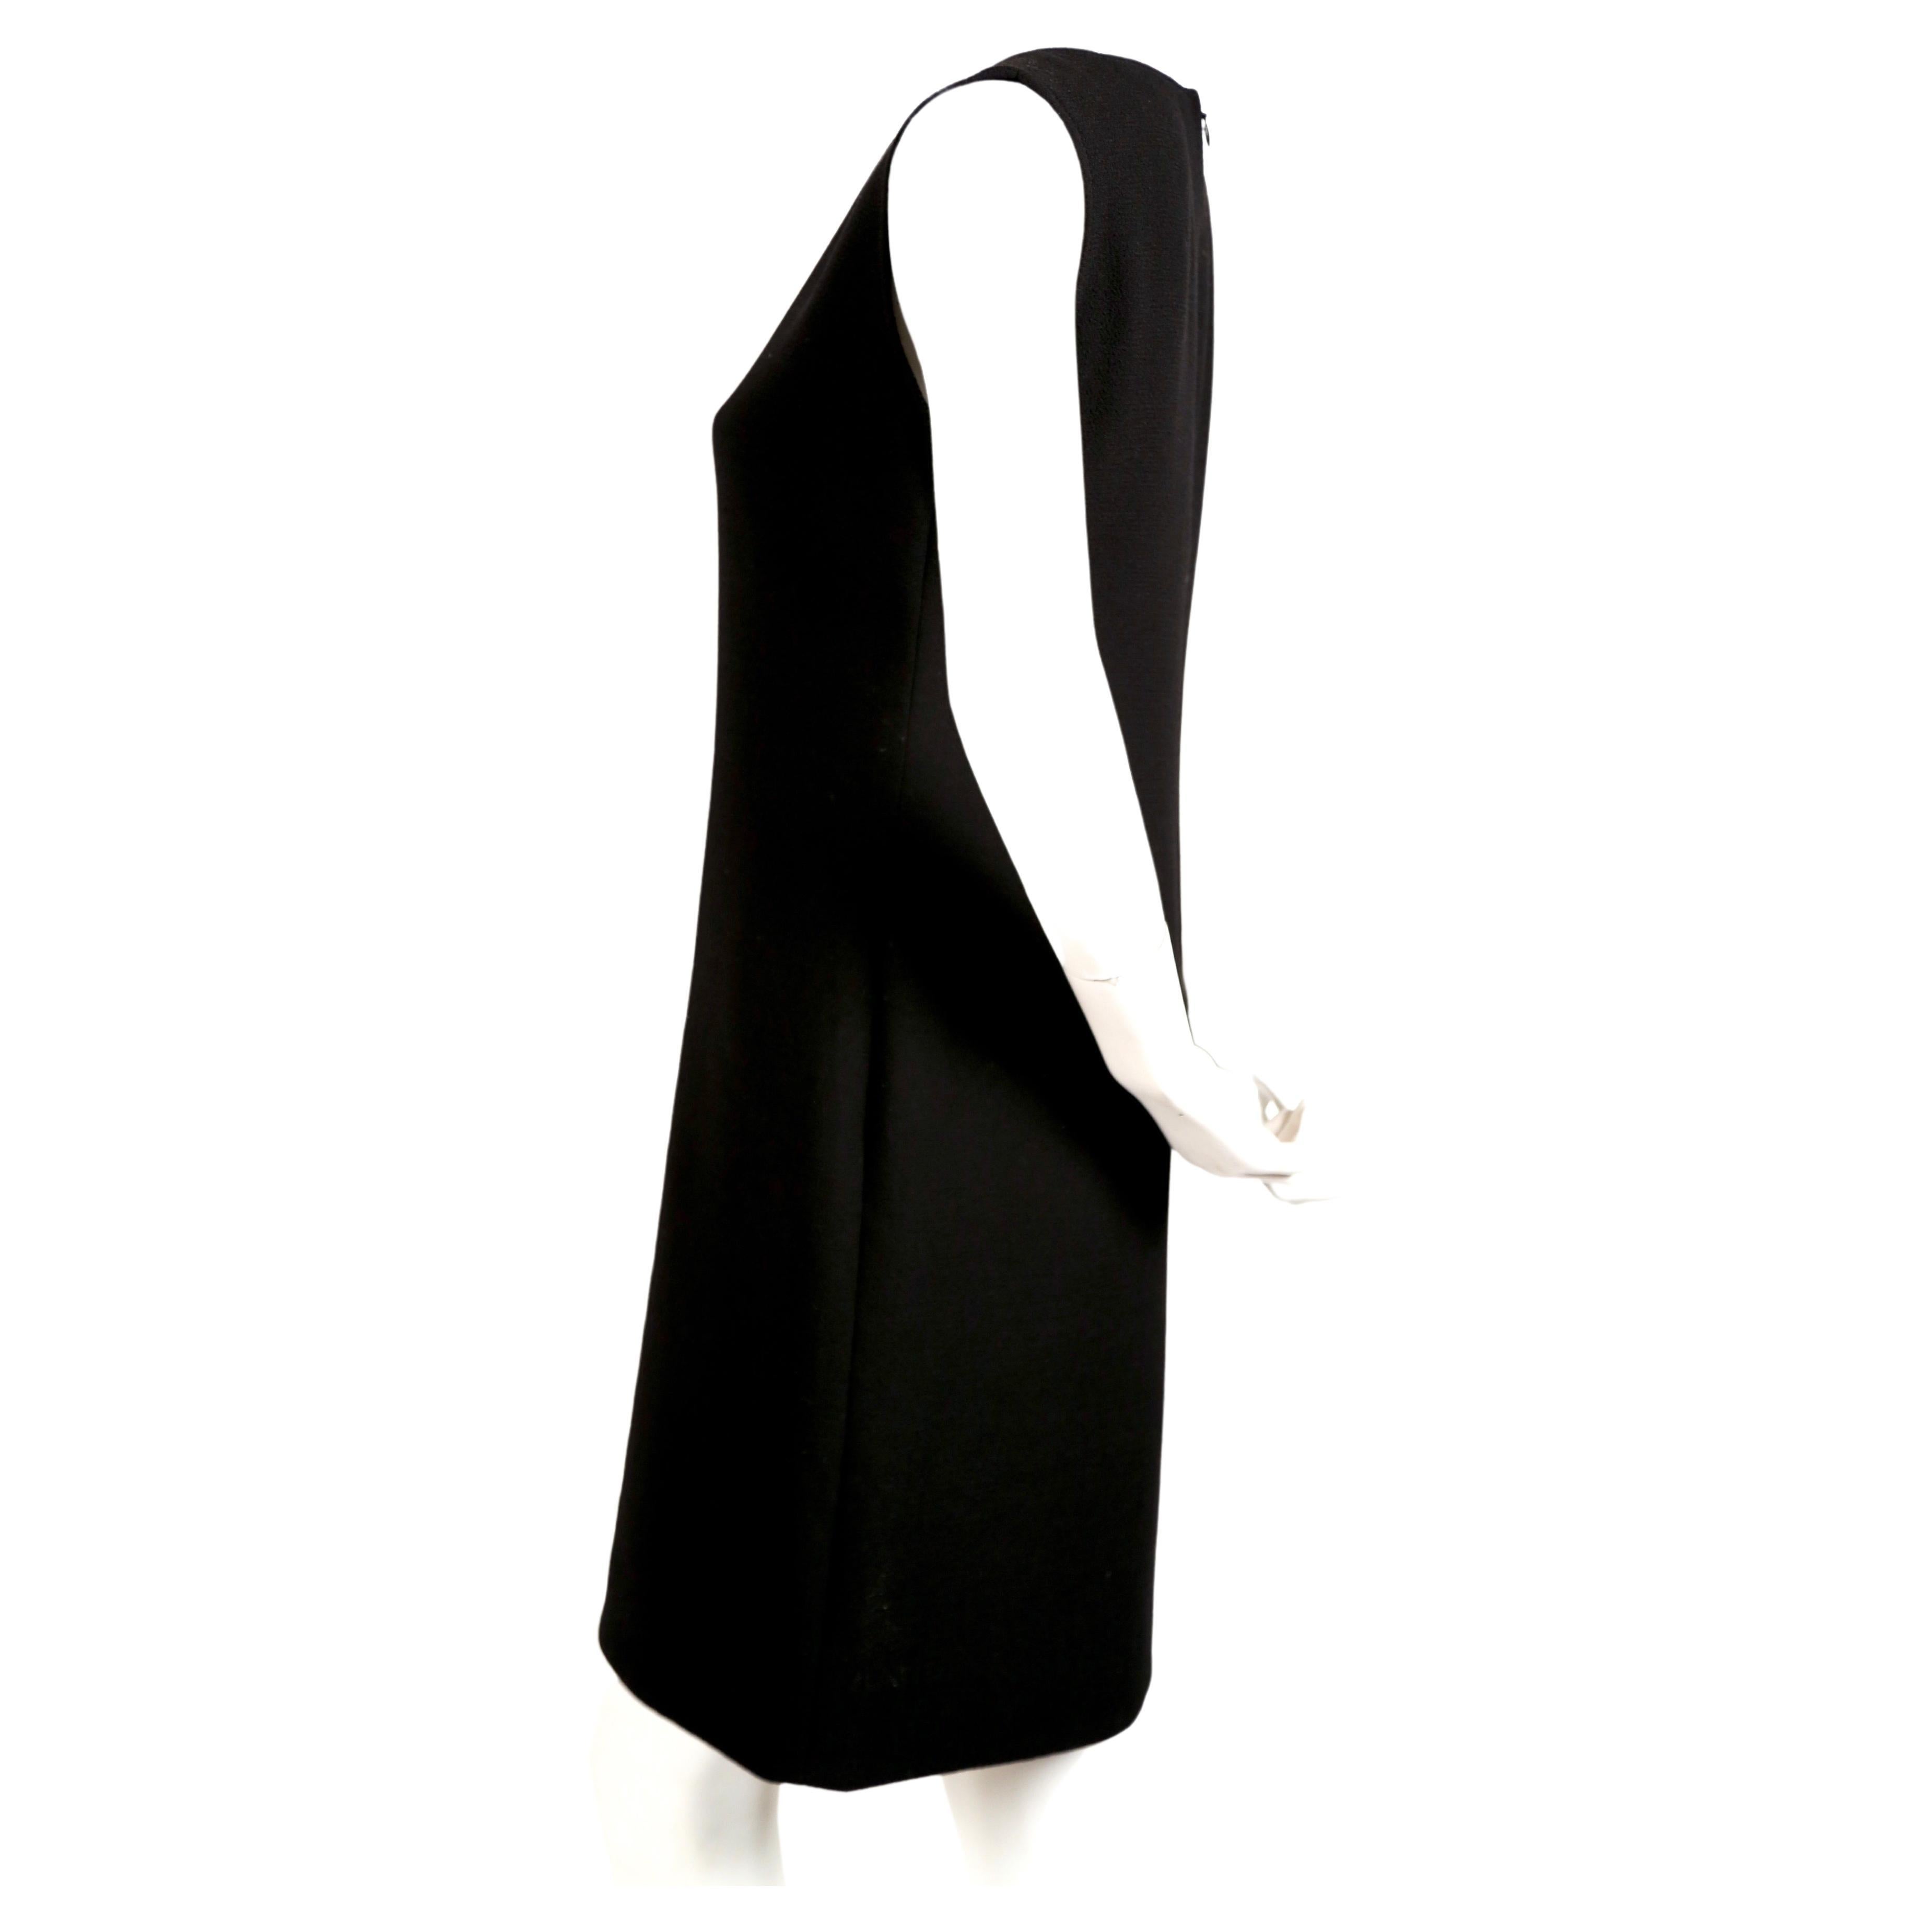 Black wool, haute couture dress with circular cut-outs lined with red wool, designed by Pierre Cardin dating to the late 1960's. Sleek shape falls from the shoulders to the hem skimming the body creating a subtle A-line shape. Fabric is not bulky.